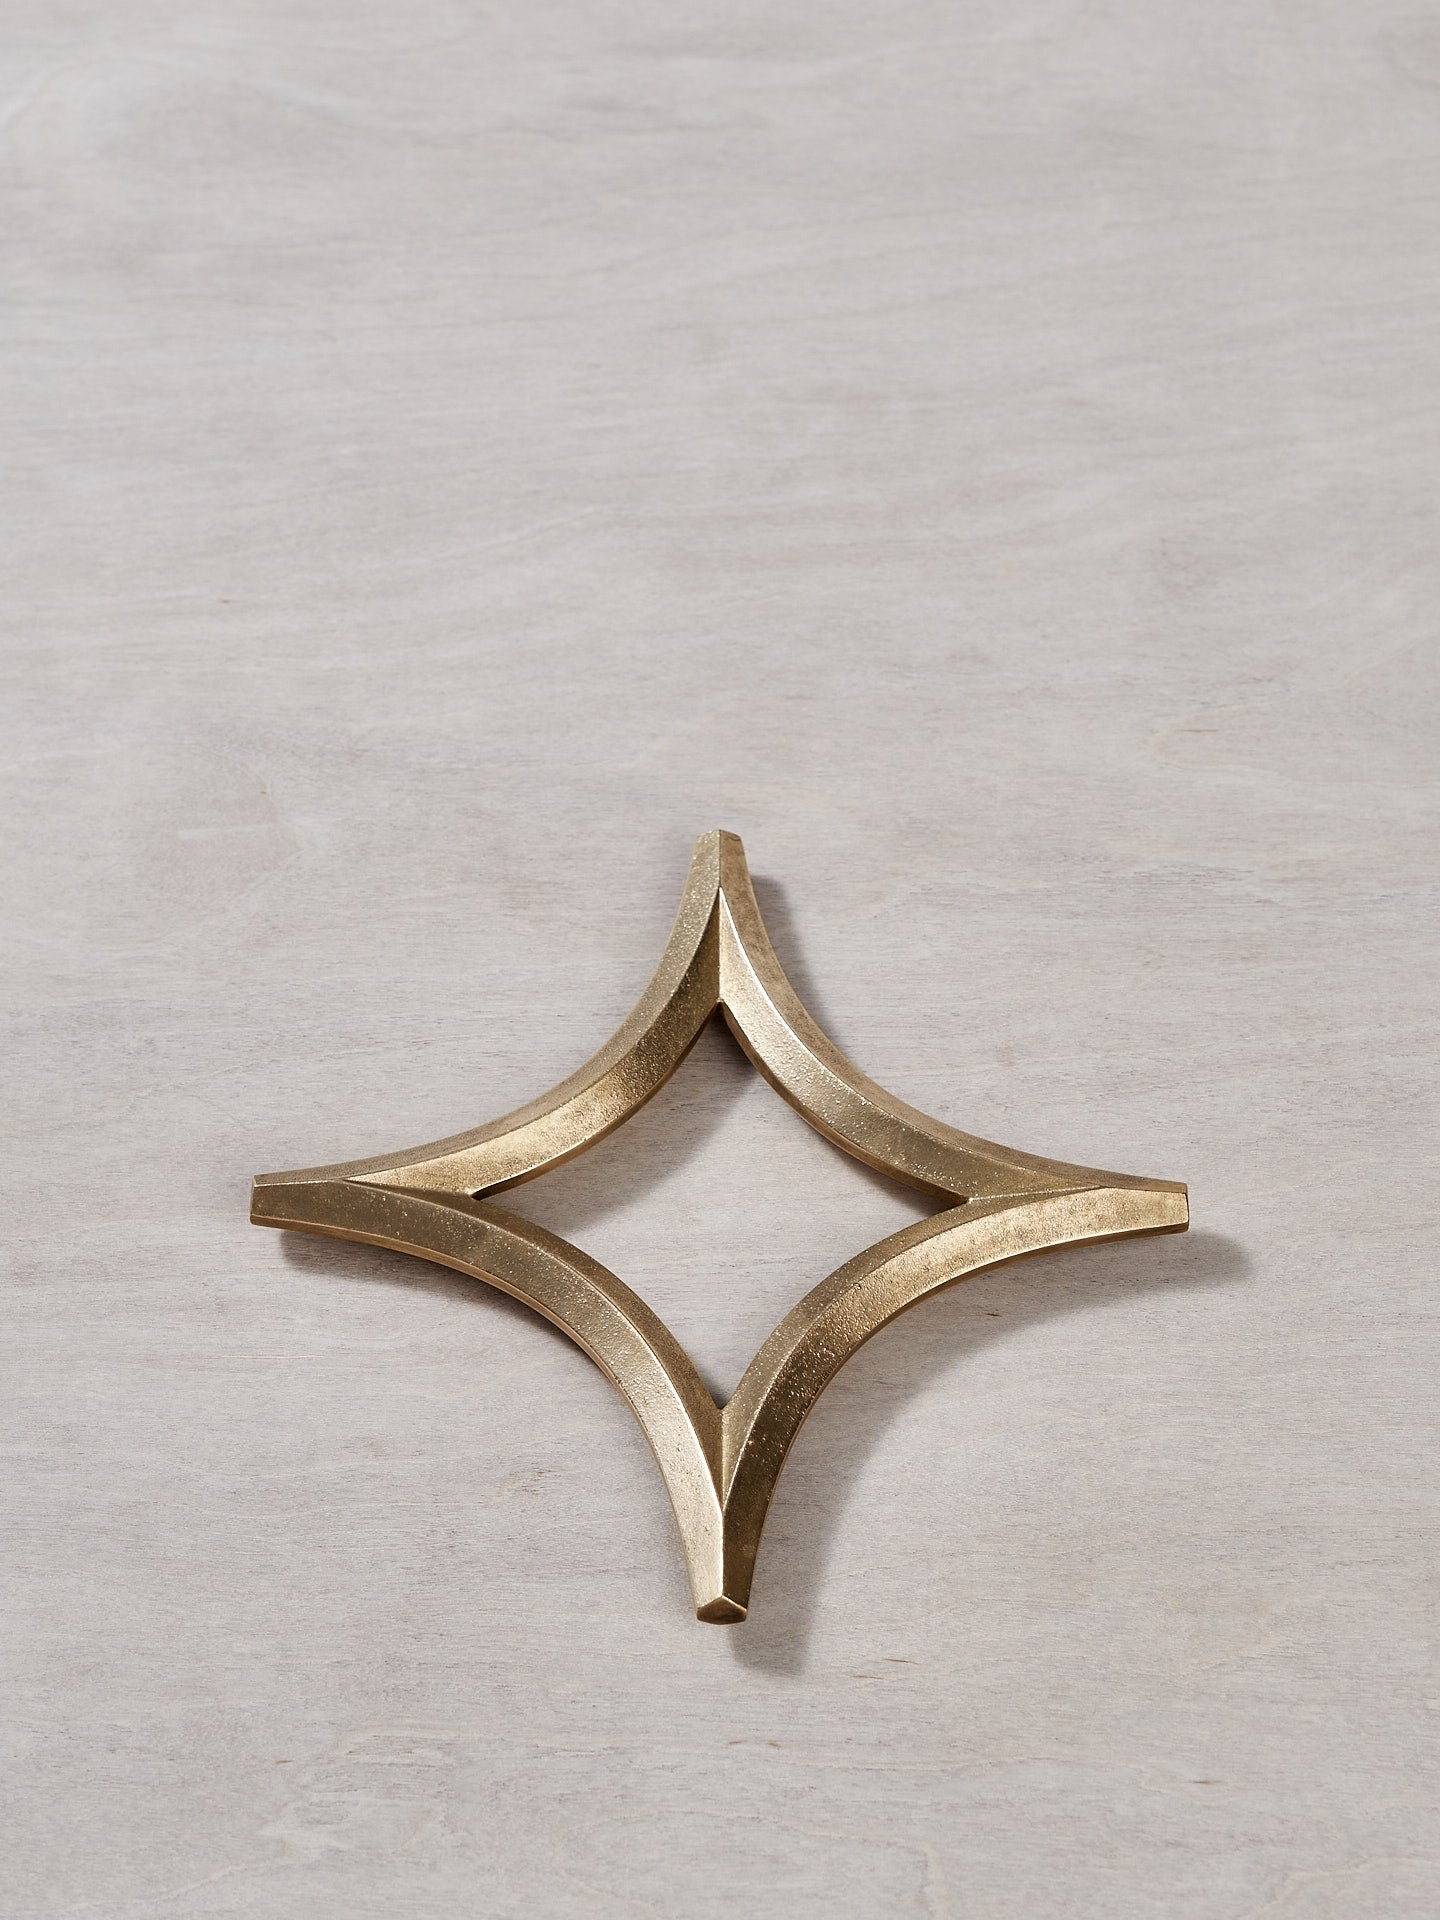 A Star Trivet – Solid Brass by Futagami on a wooden surface.